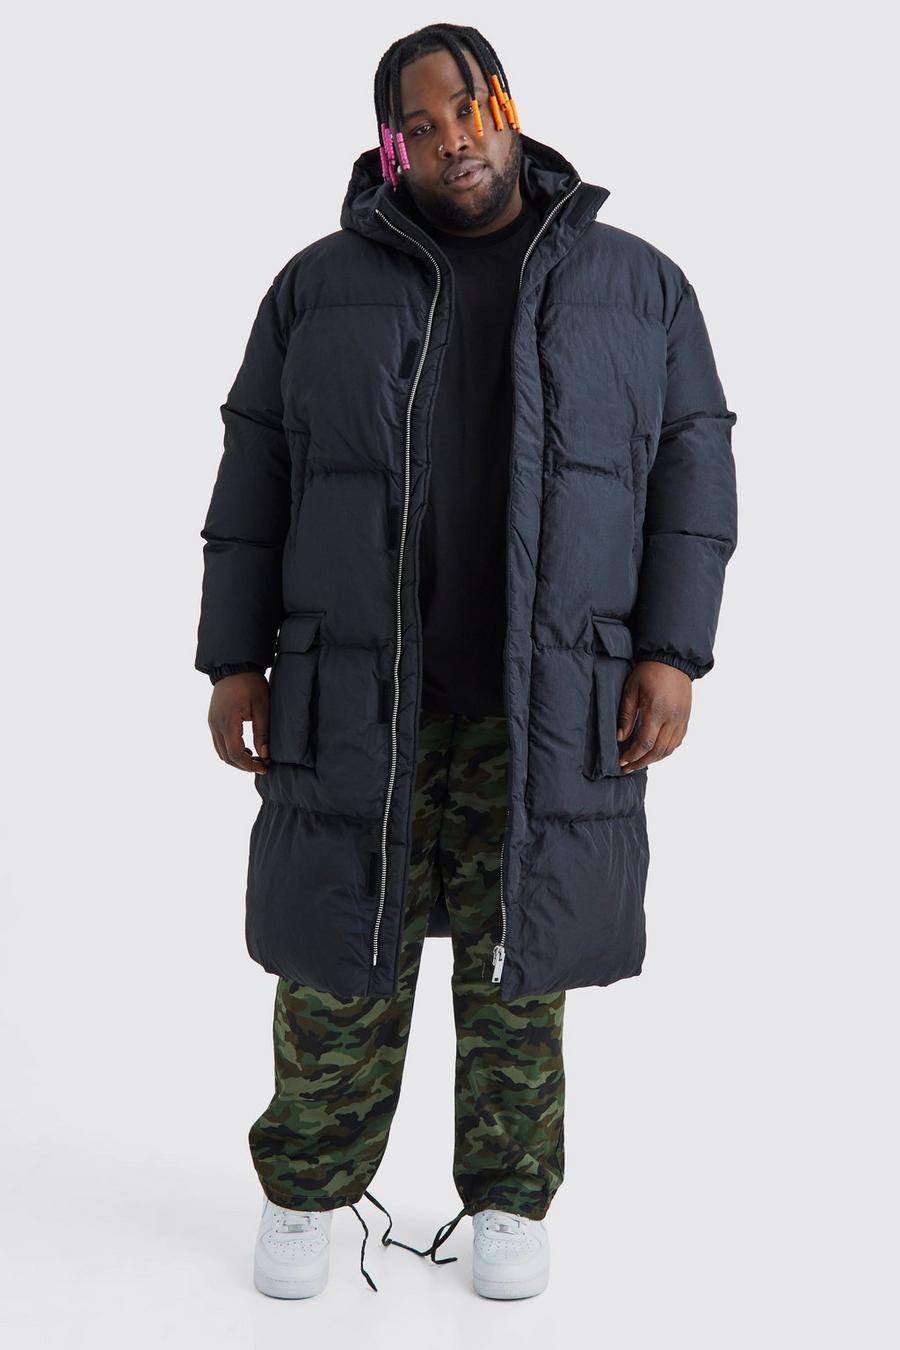 boohoo Men's Plus Size Tapestry Hooded Puffer Jacket